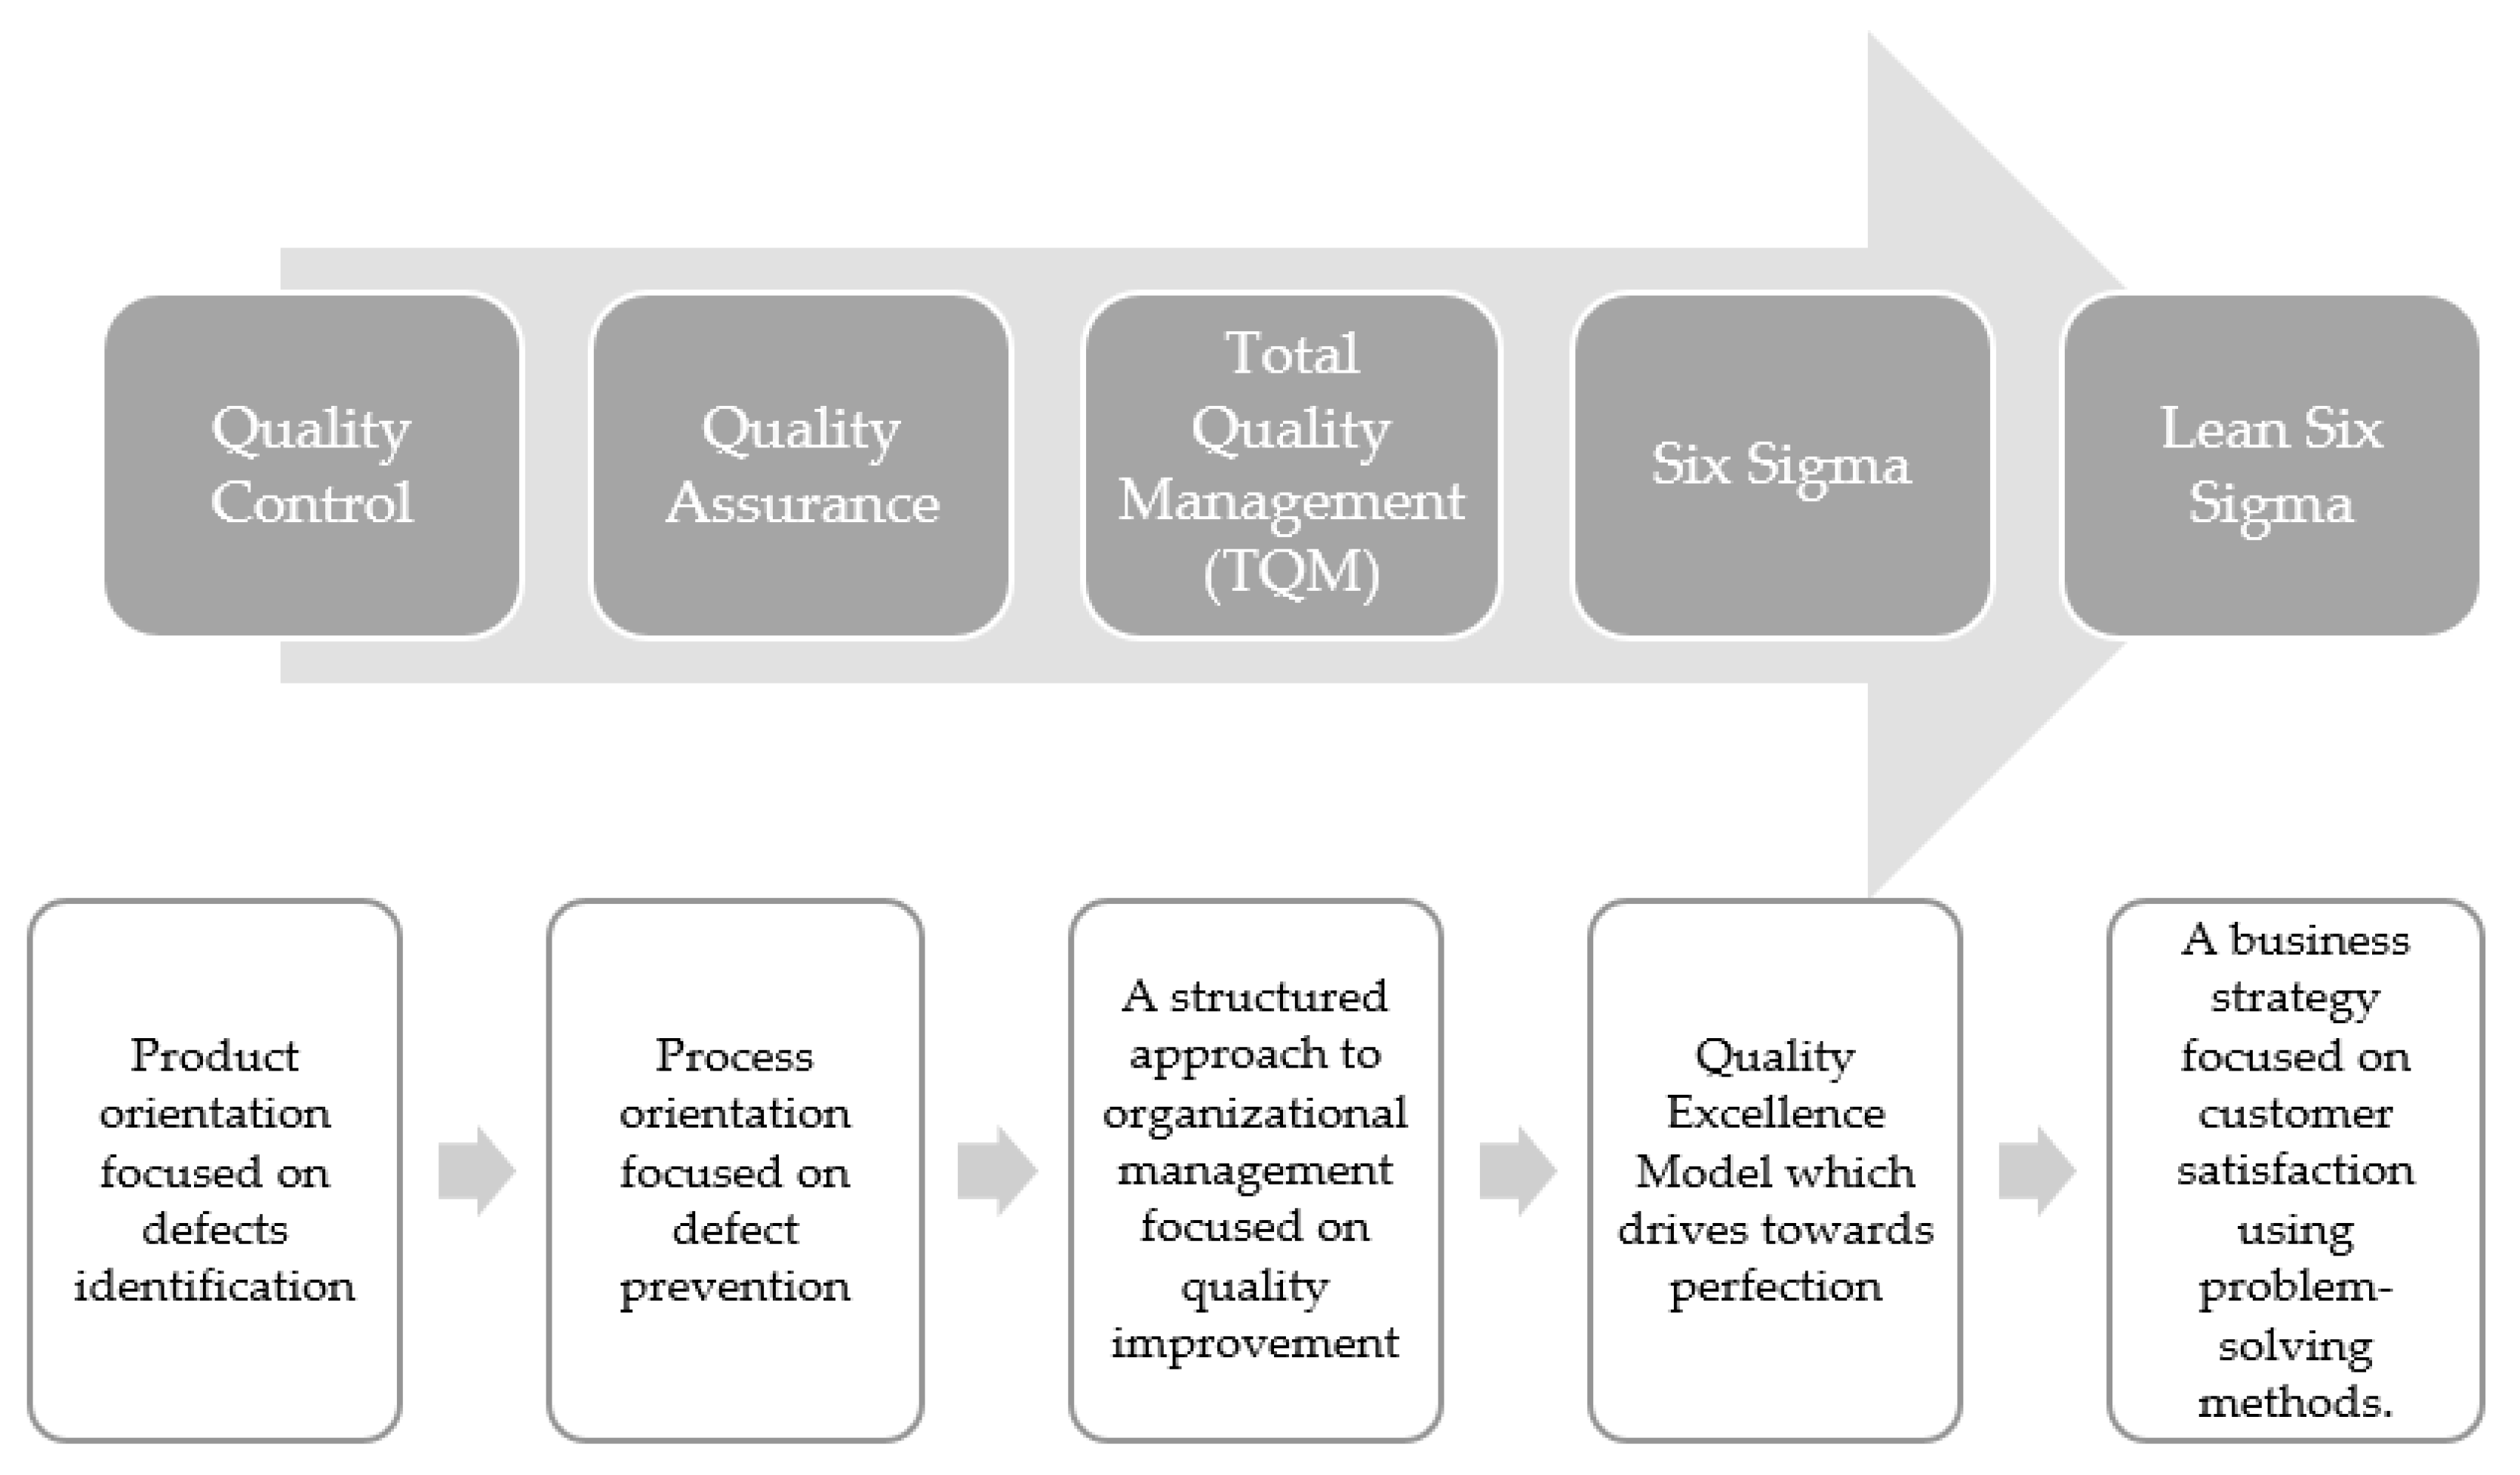 What Is Lean Six Sigma, and Is It Still Relevant Today?